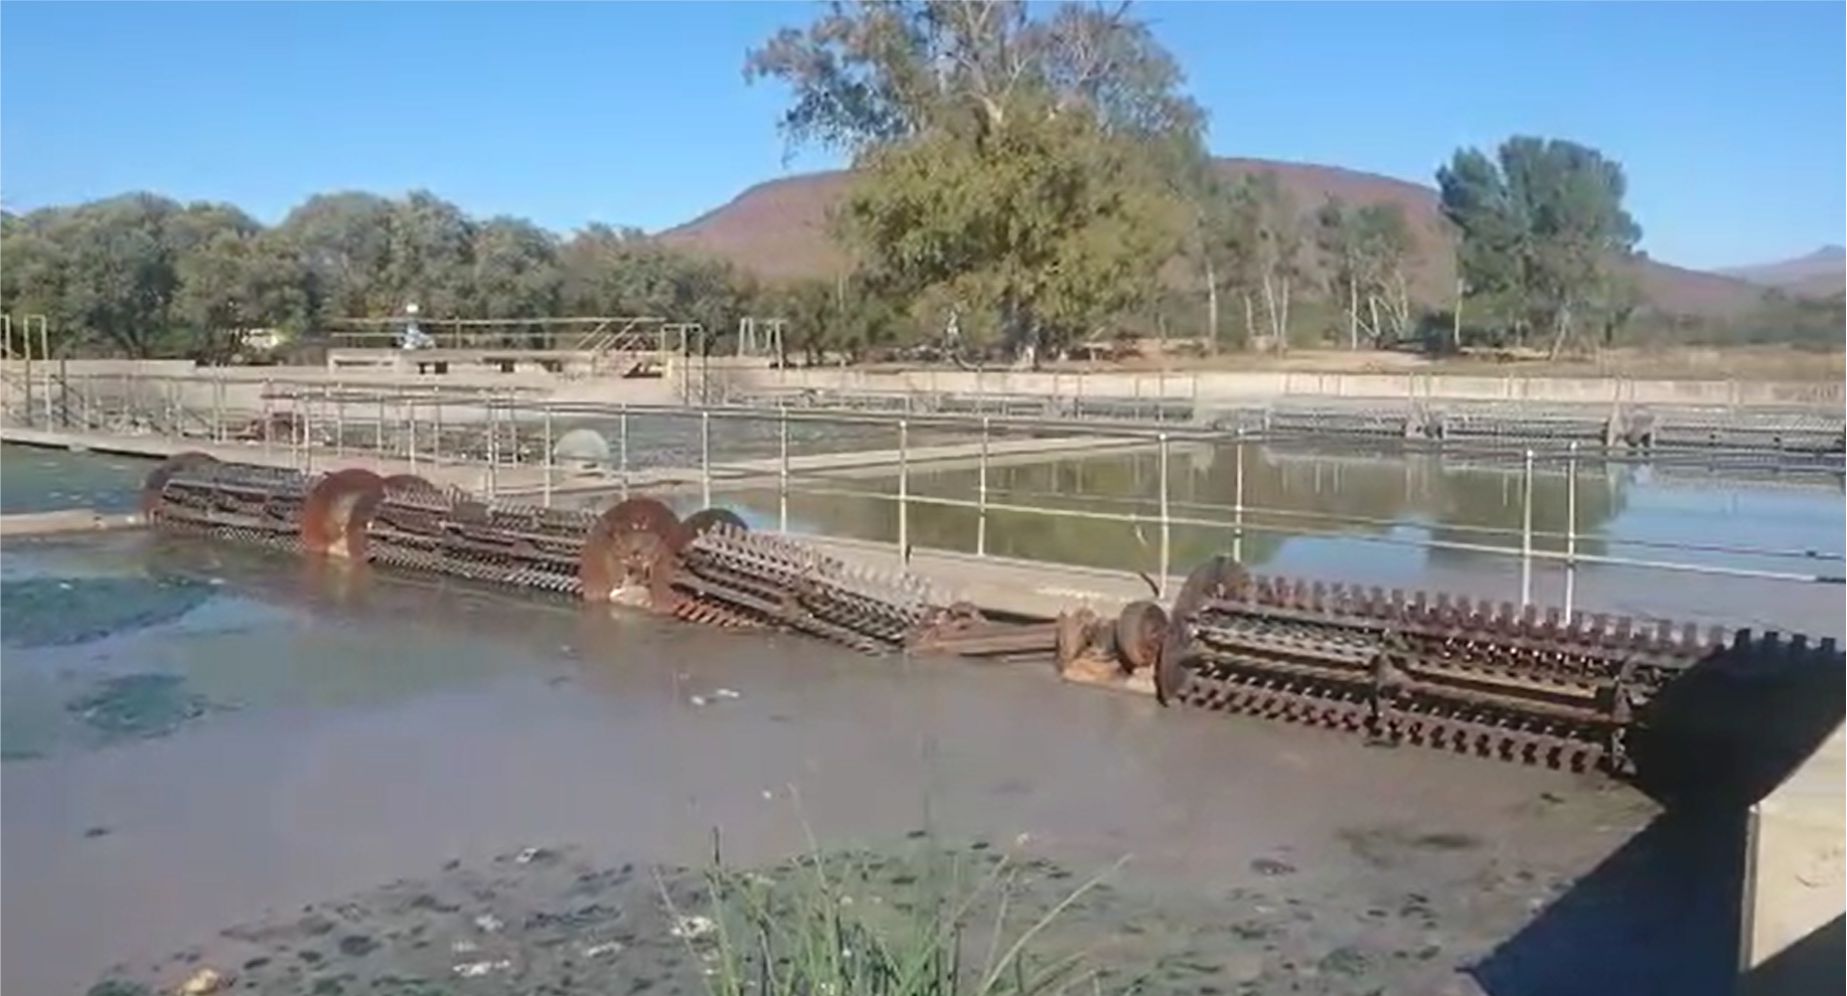 Contractor downs tools, sewage continues to flow into Fish River